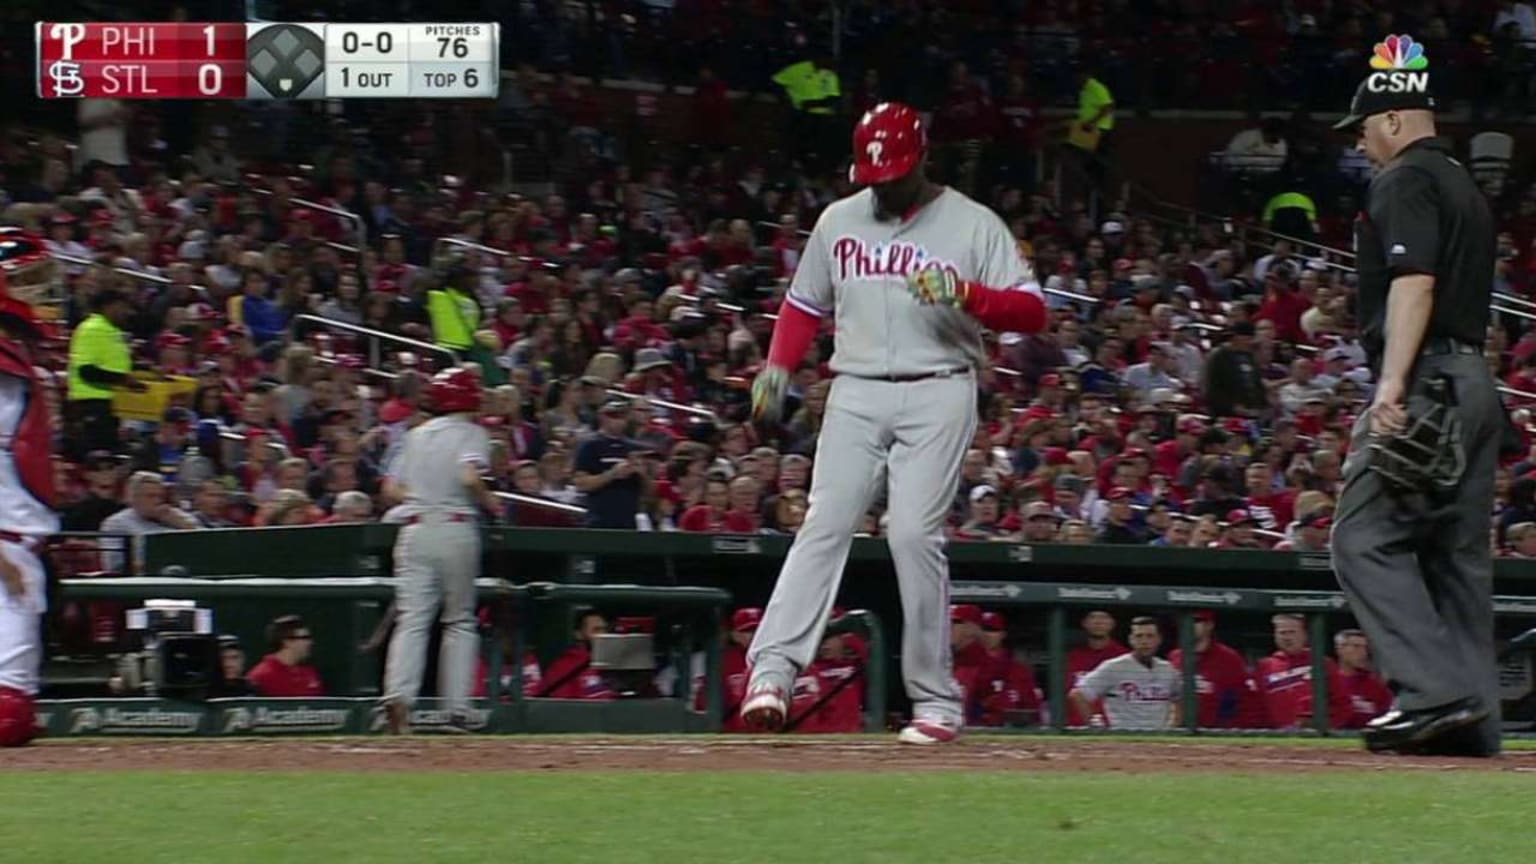 Phillies' Ryan Howard piling up strikeouts at record pace in World